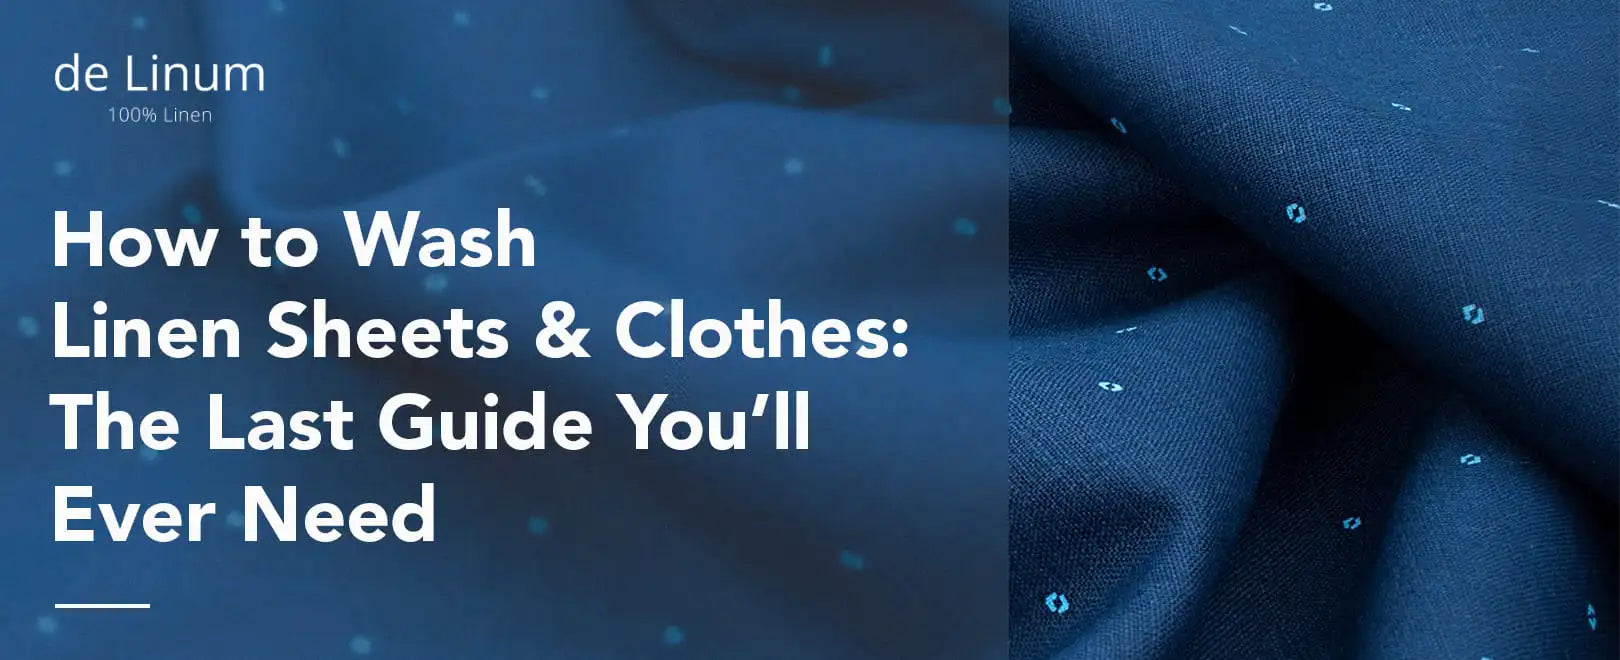 How to Wash Linen Clothes: The Last Guide You'll Ever Need